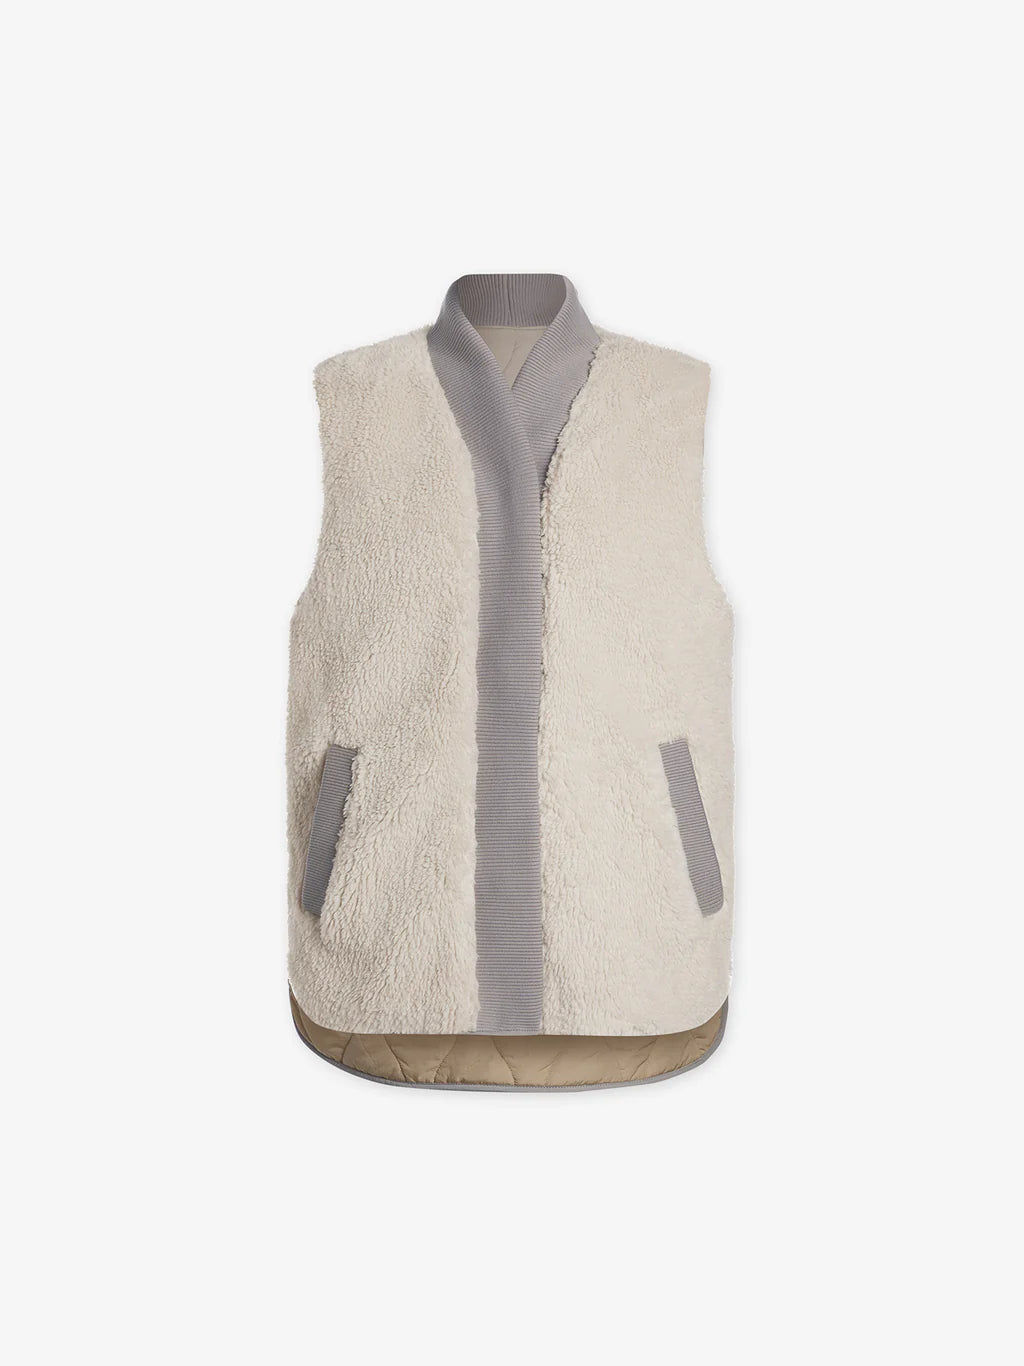 Varley Covey reversible Quilt Gilet